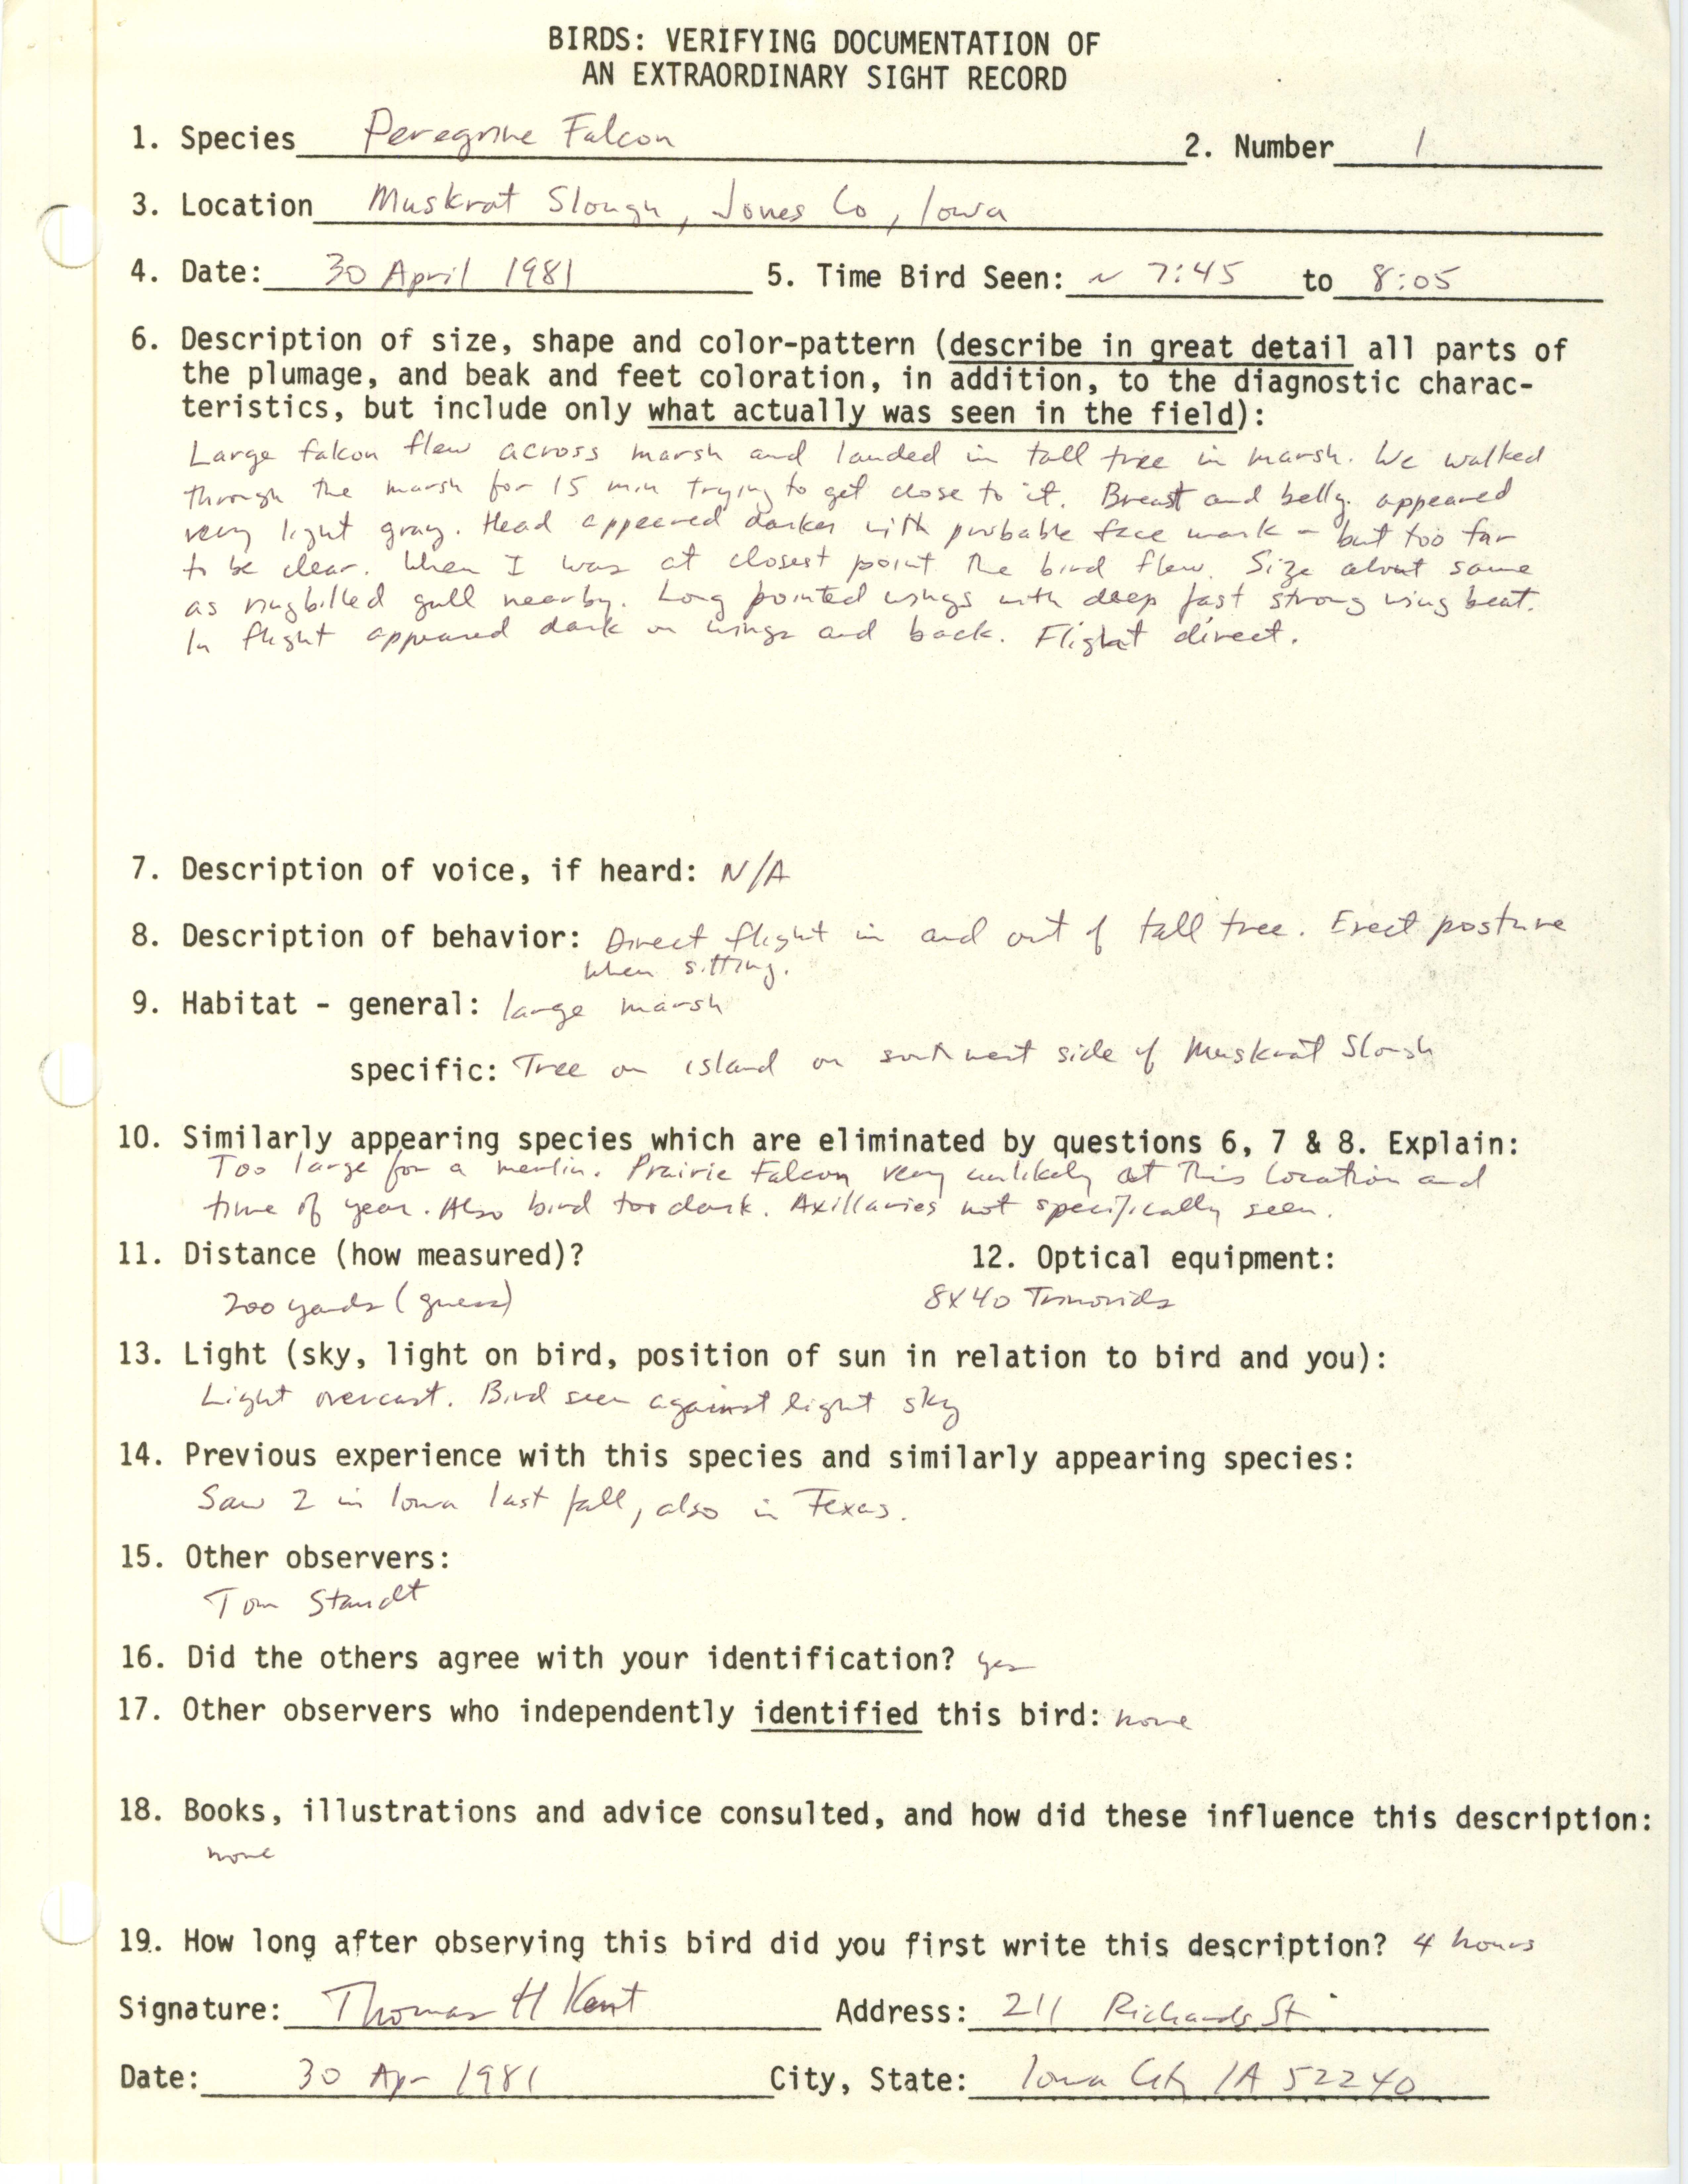 Birds: verifying documentation of an extraordinary sight record submitted by Thomas H. Kent, April 30 1981